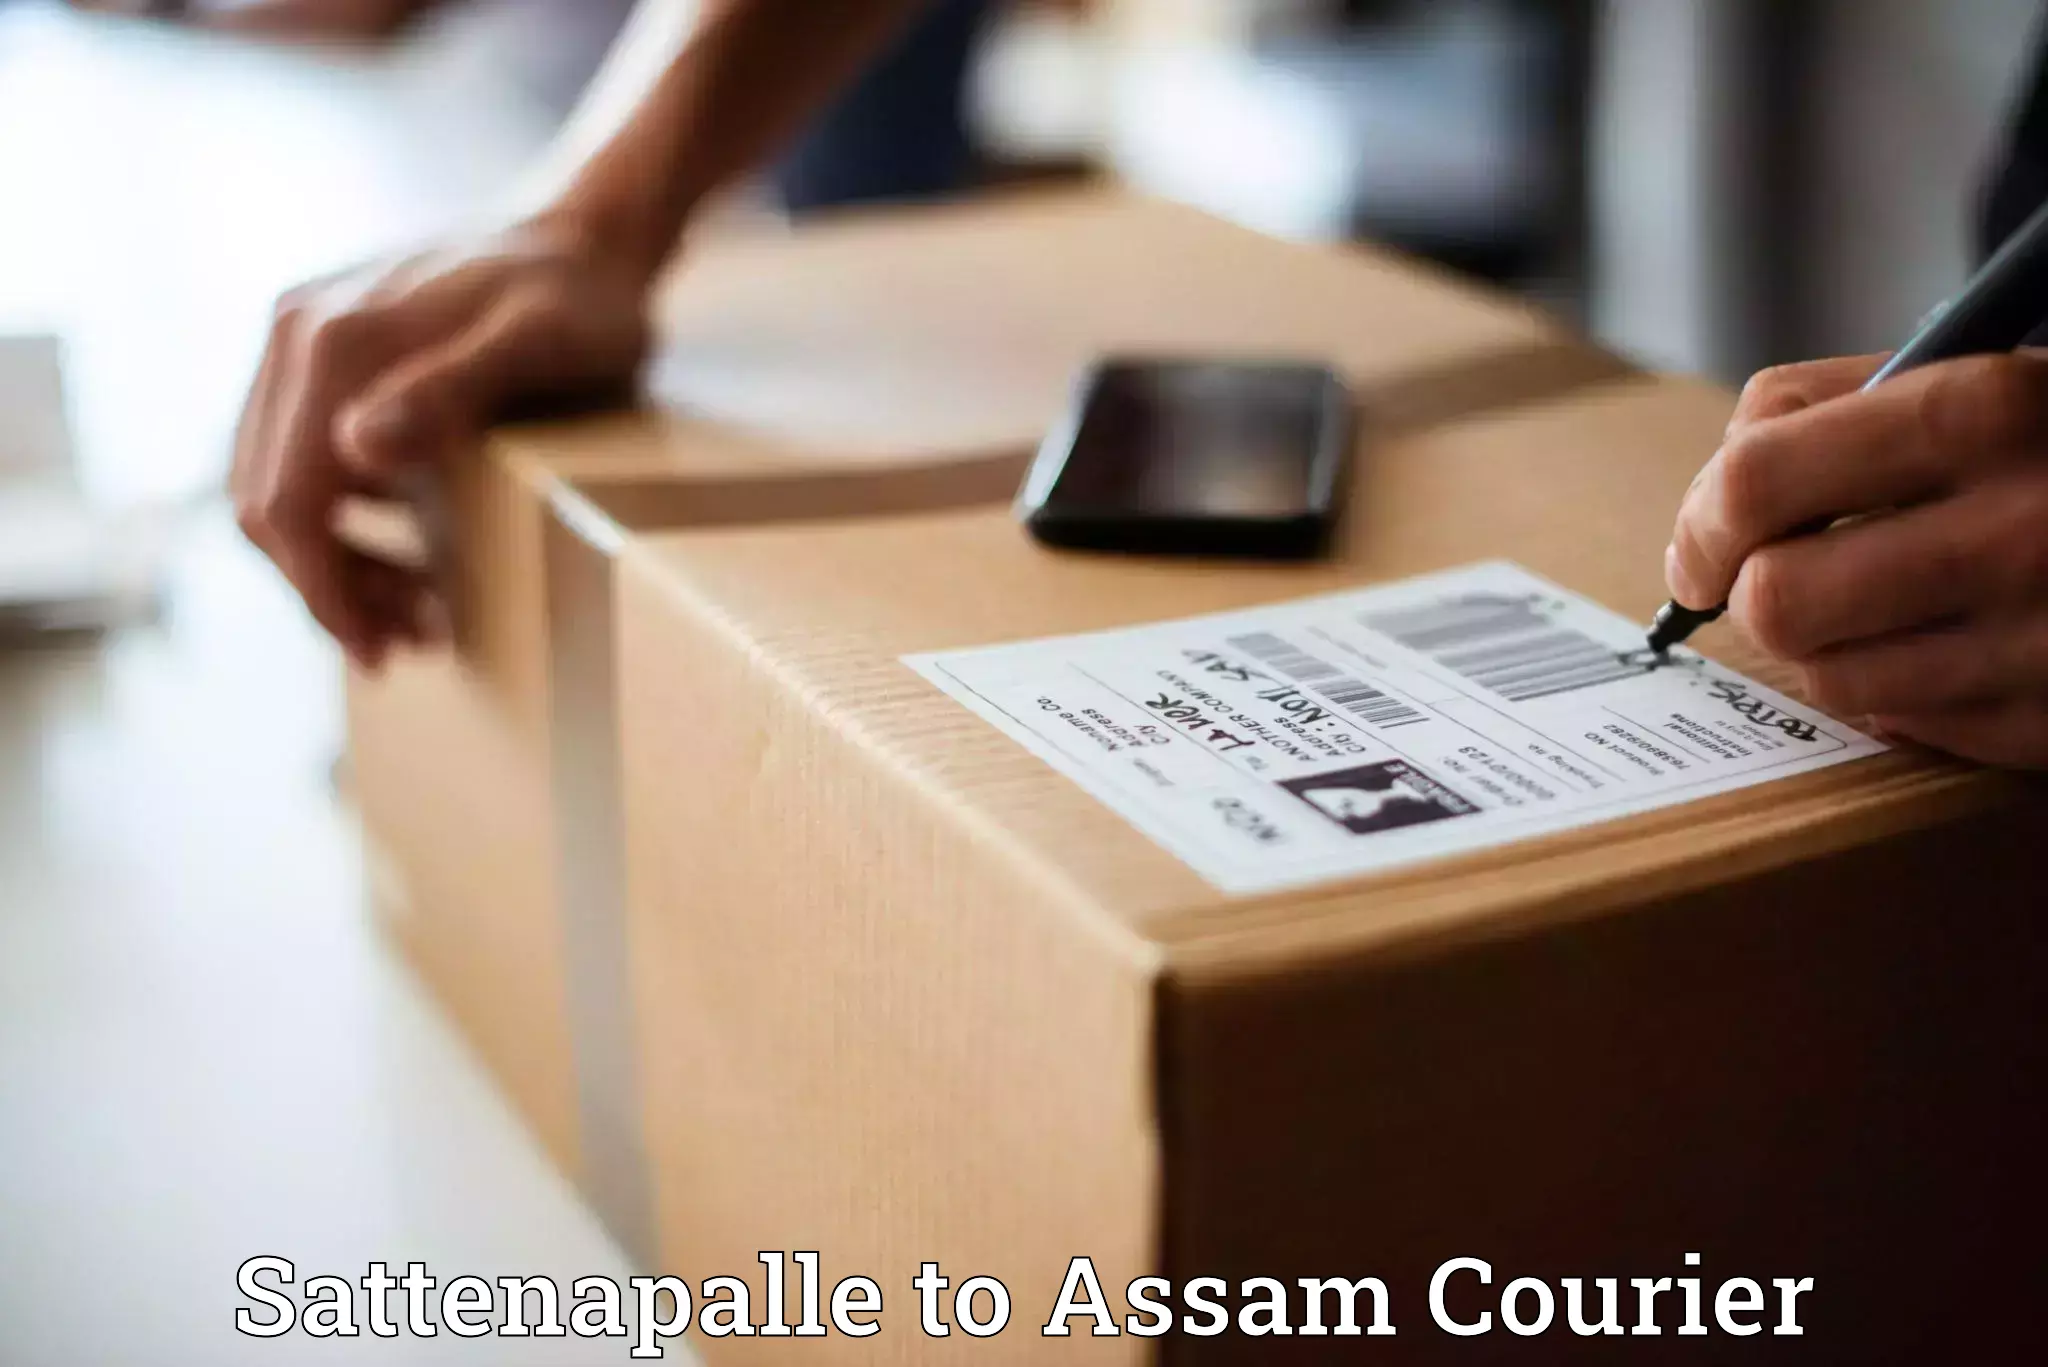 Efficient order fulfillment in Sattenapalle to Lala Assam